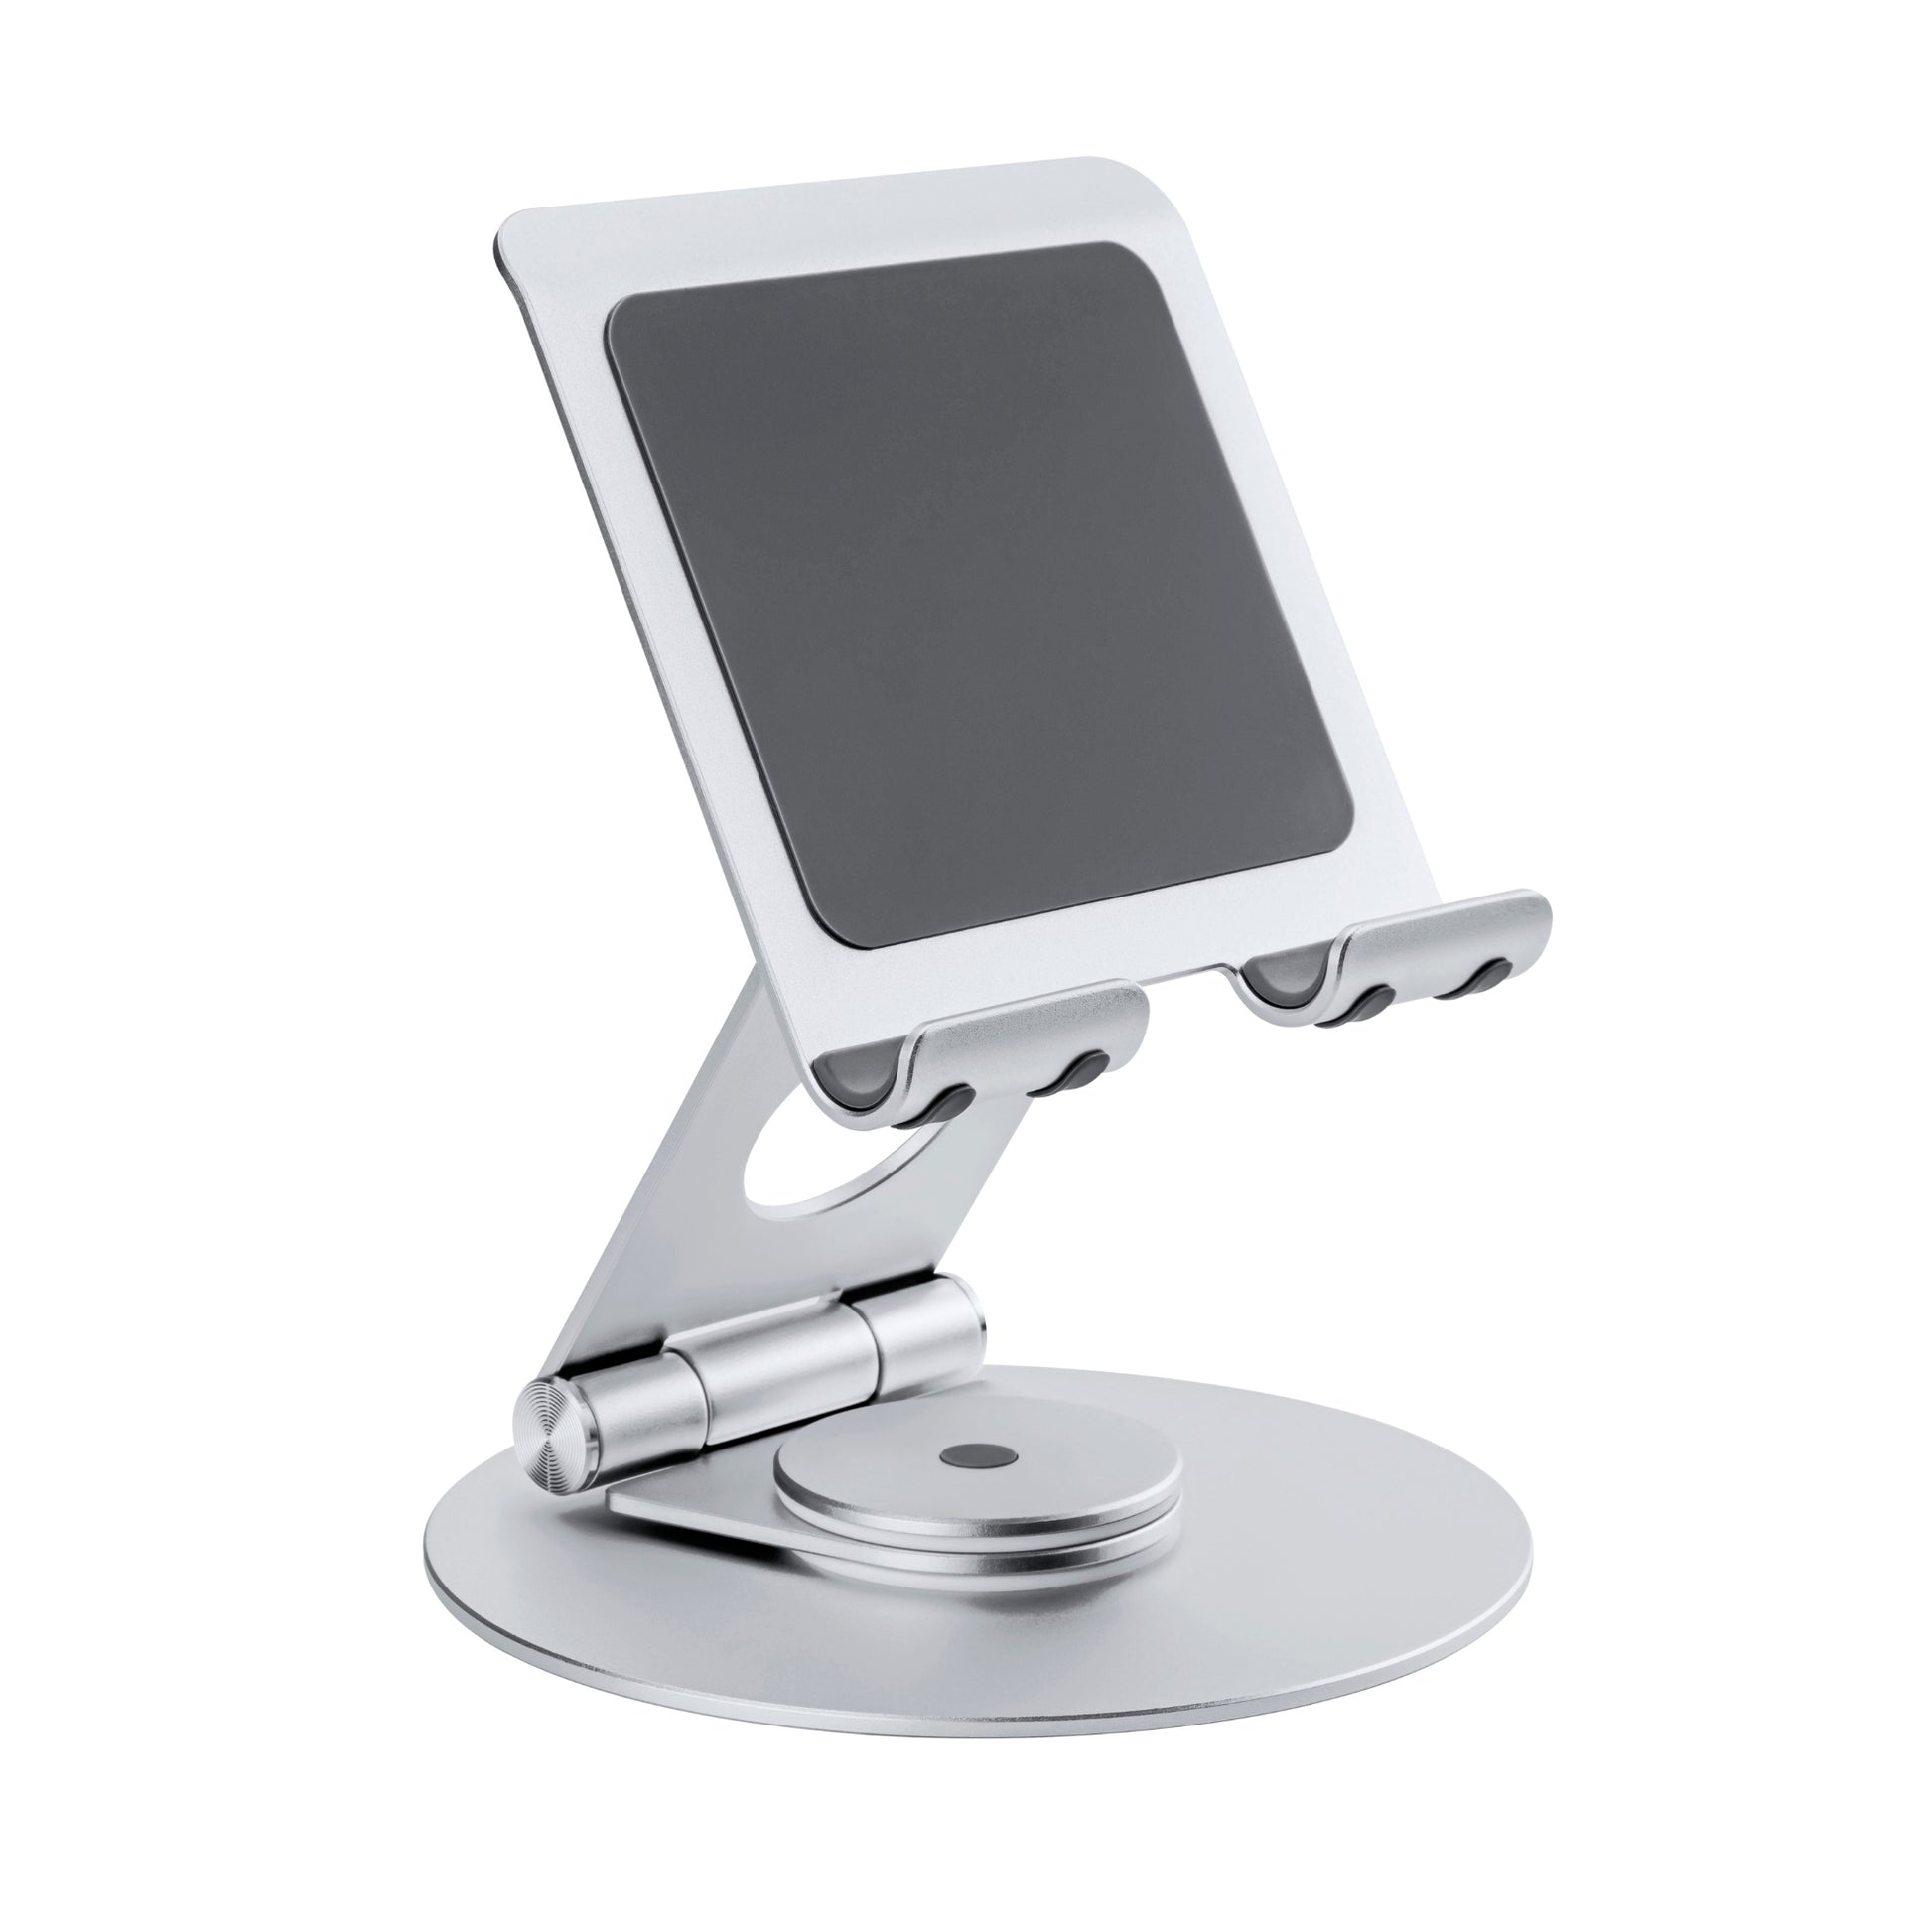 Back side of the tablet stand 2